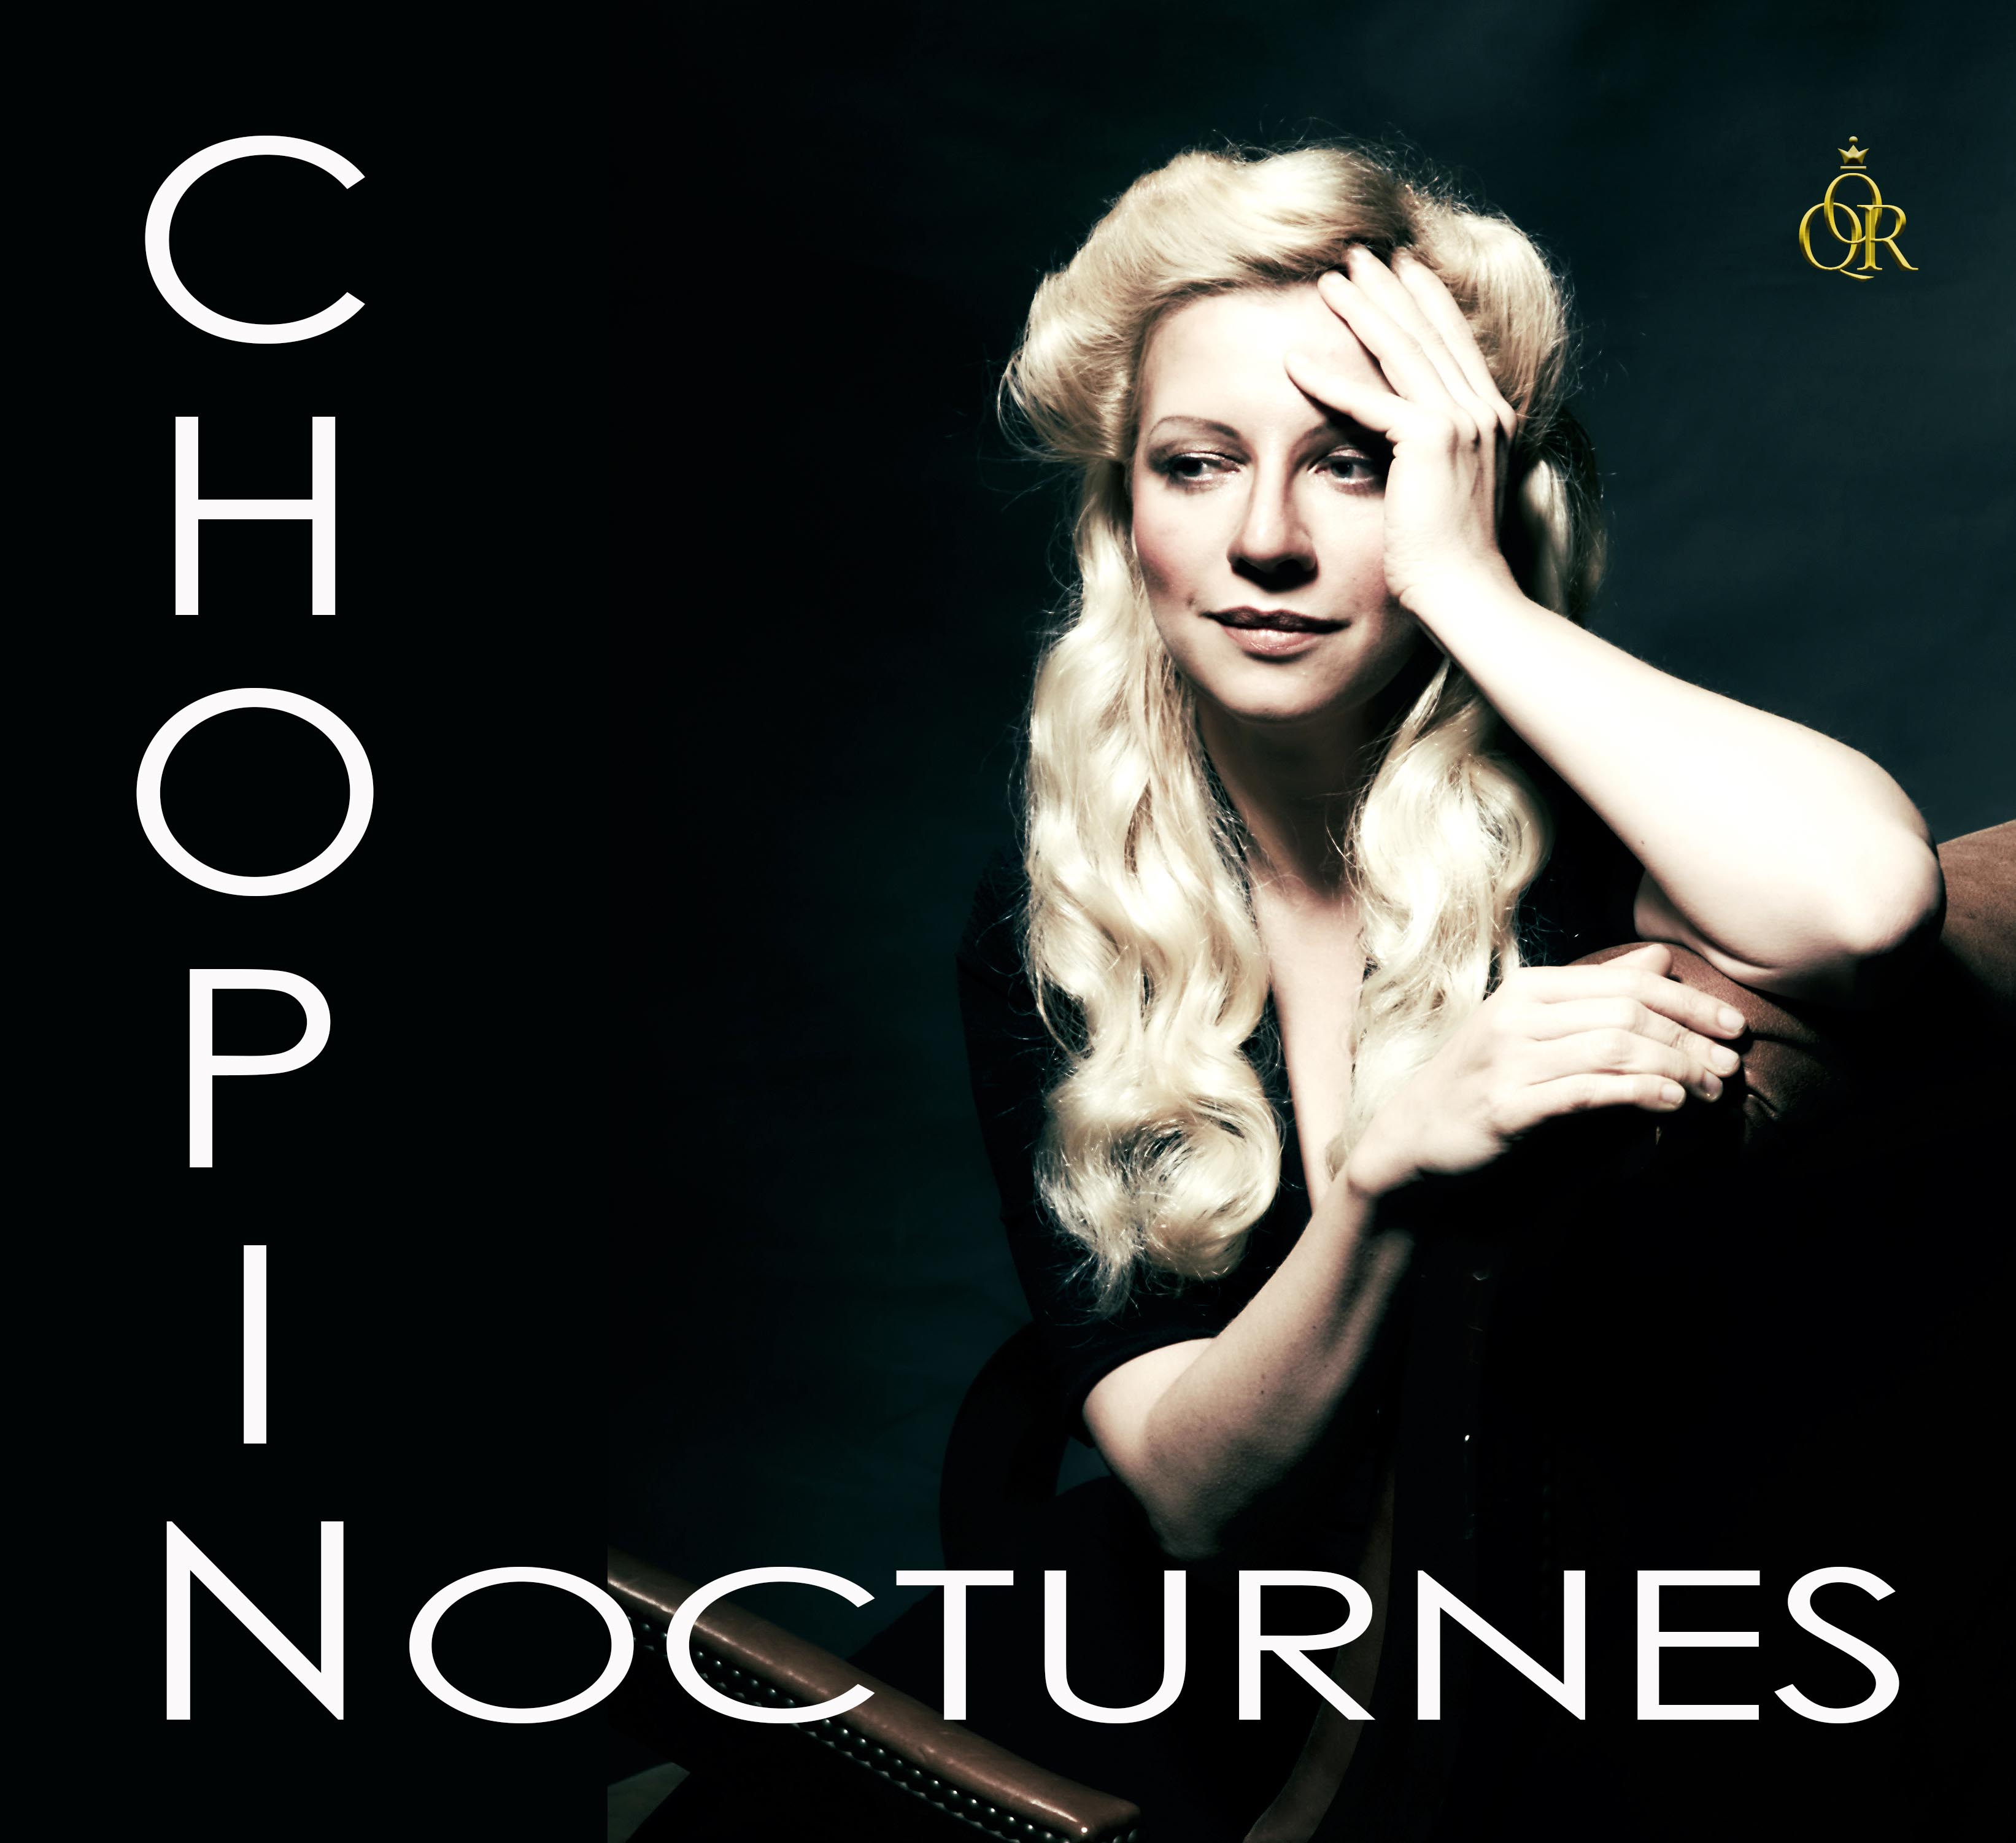 Chopin Nocturnes now available on Idagio